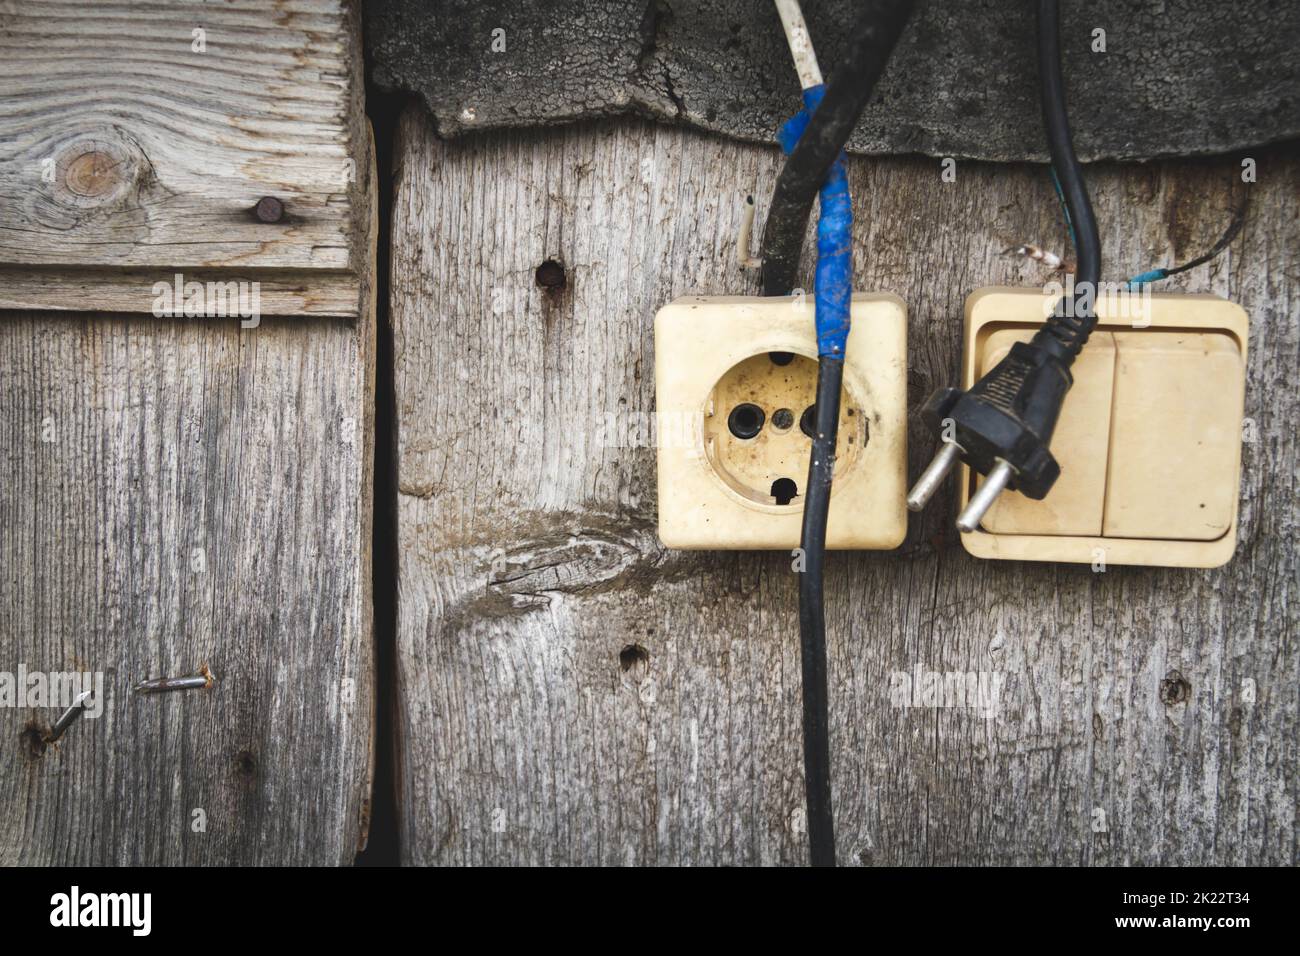 Old socket. Switch and socket. Broken electrical appliances. Non-working tool. Dangerous wires. Stock Photo